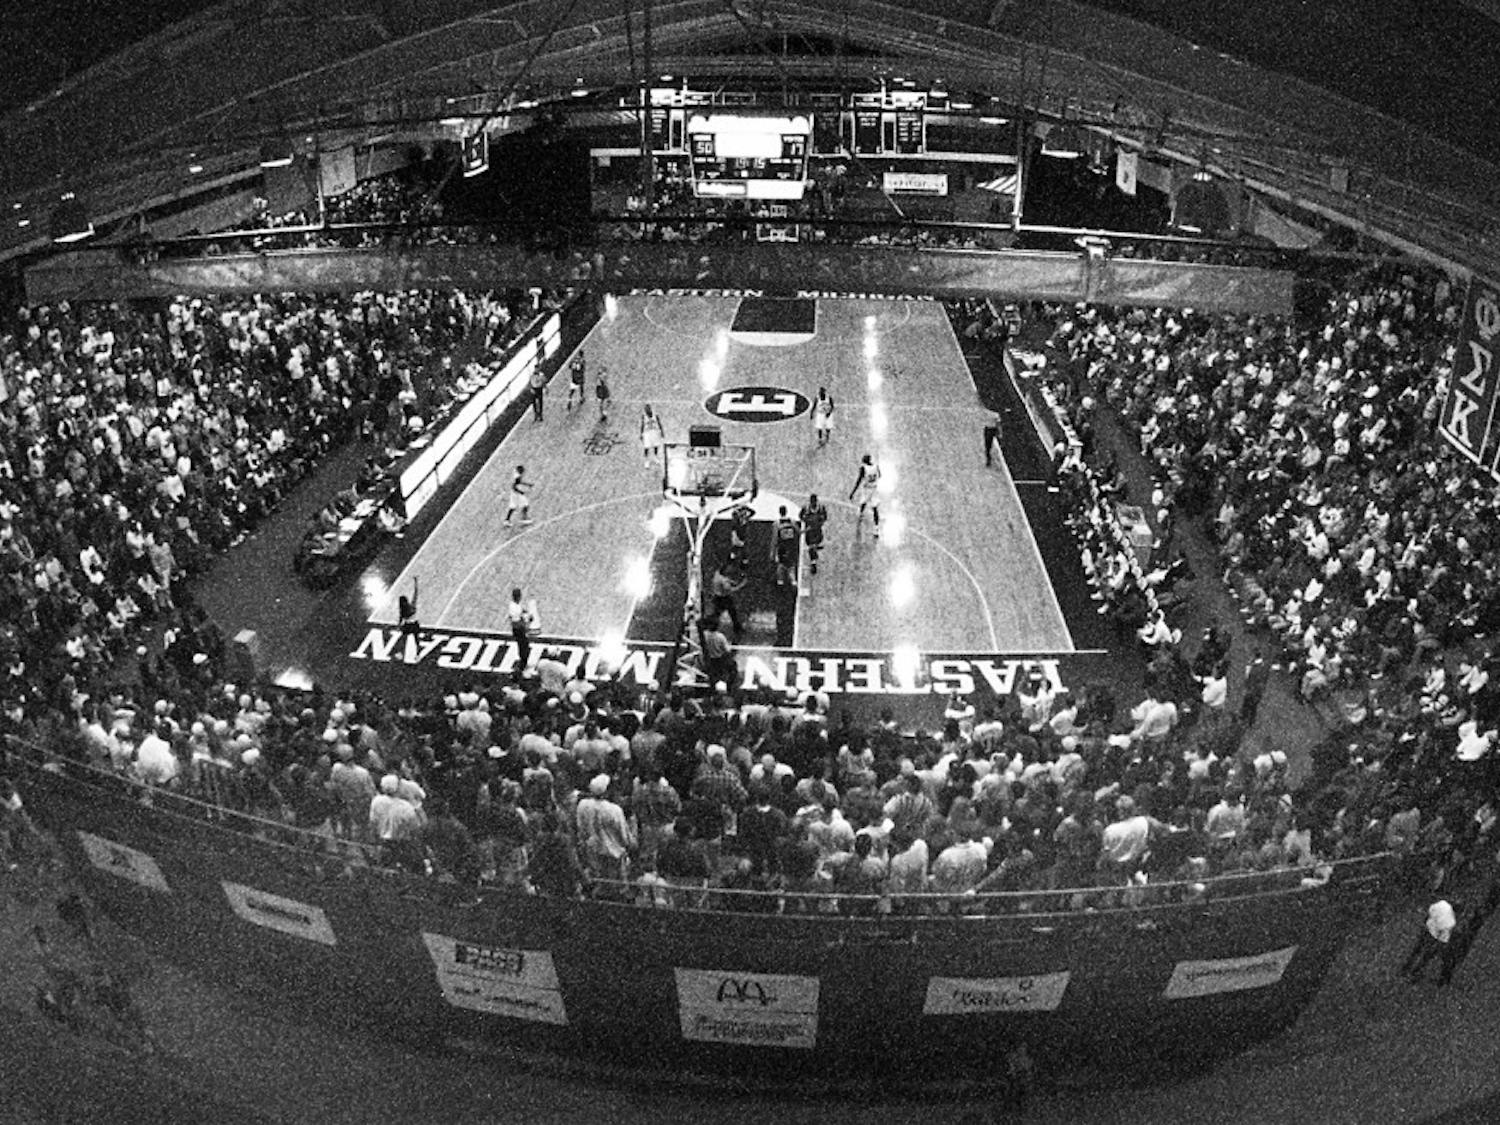 Bowen Field House on December 10th, 1992 for a men's basketball game.